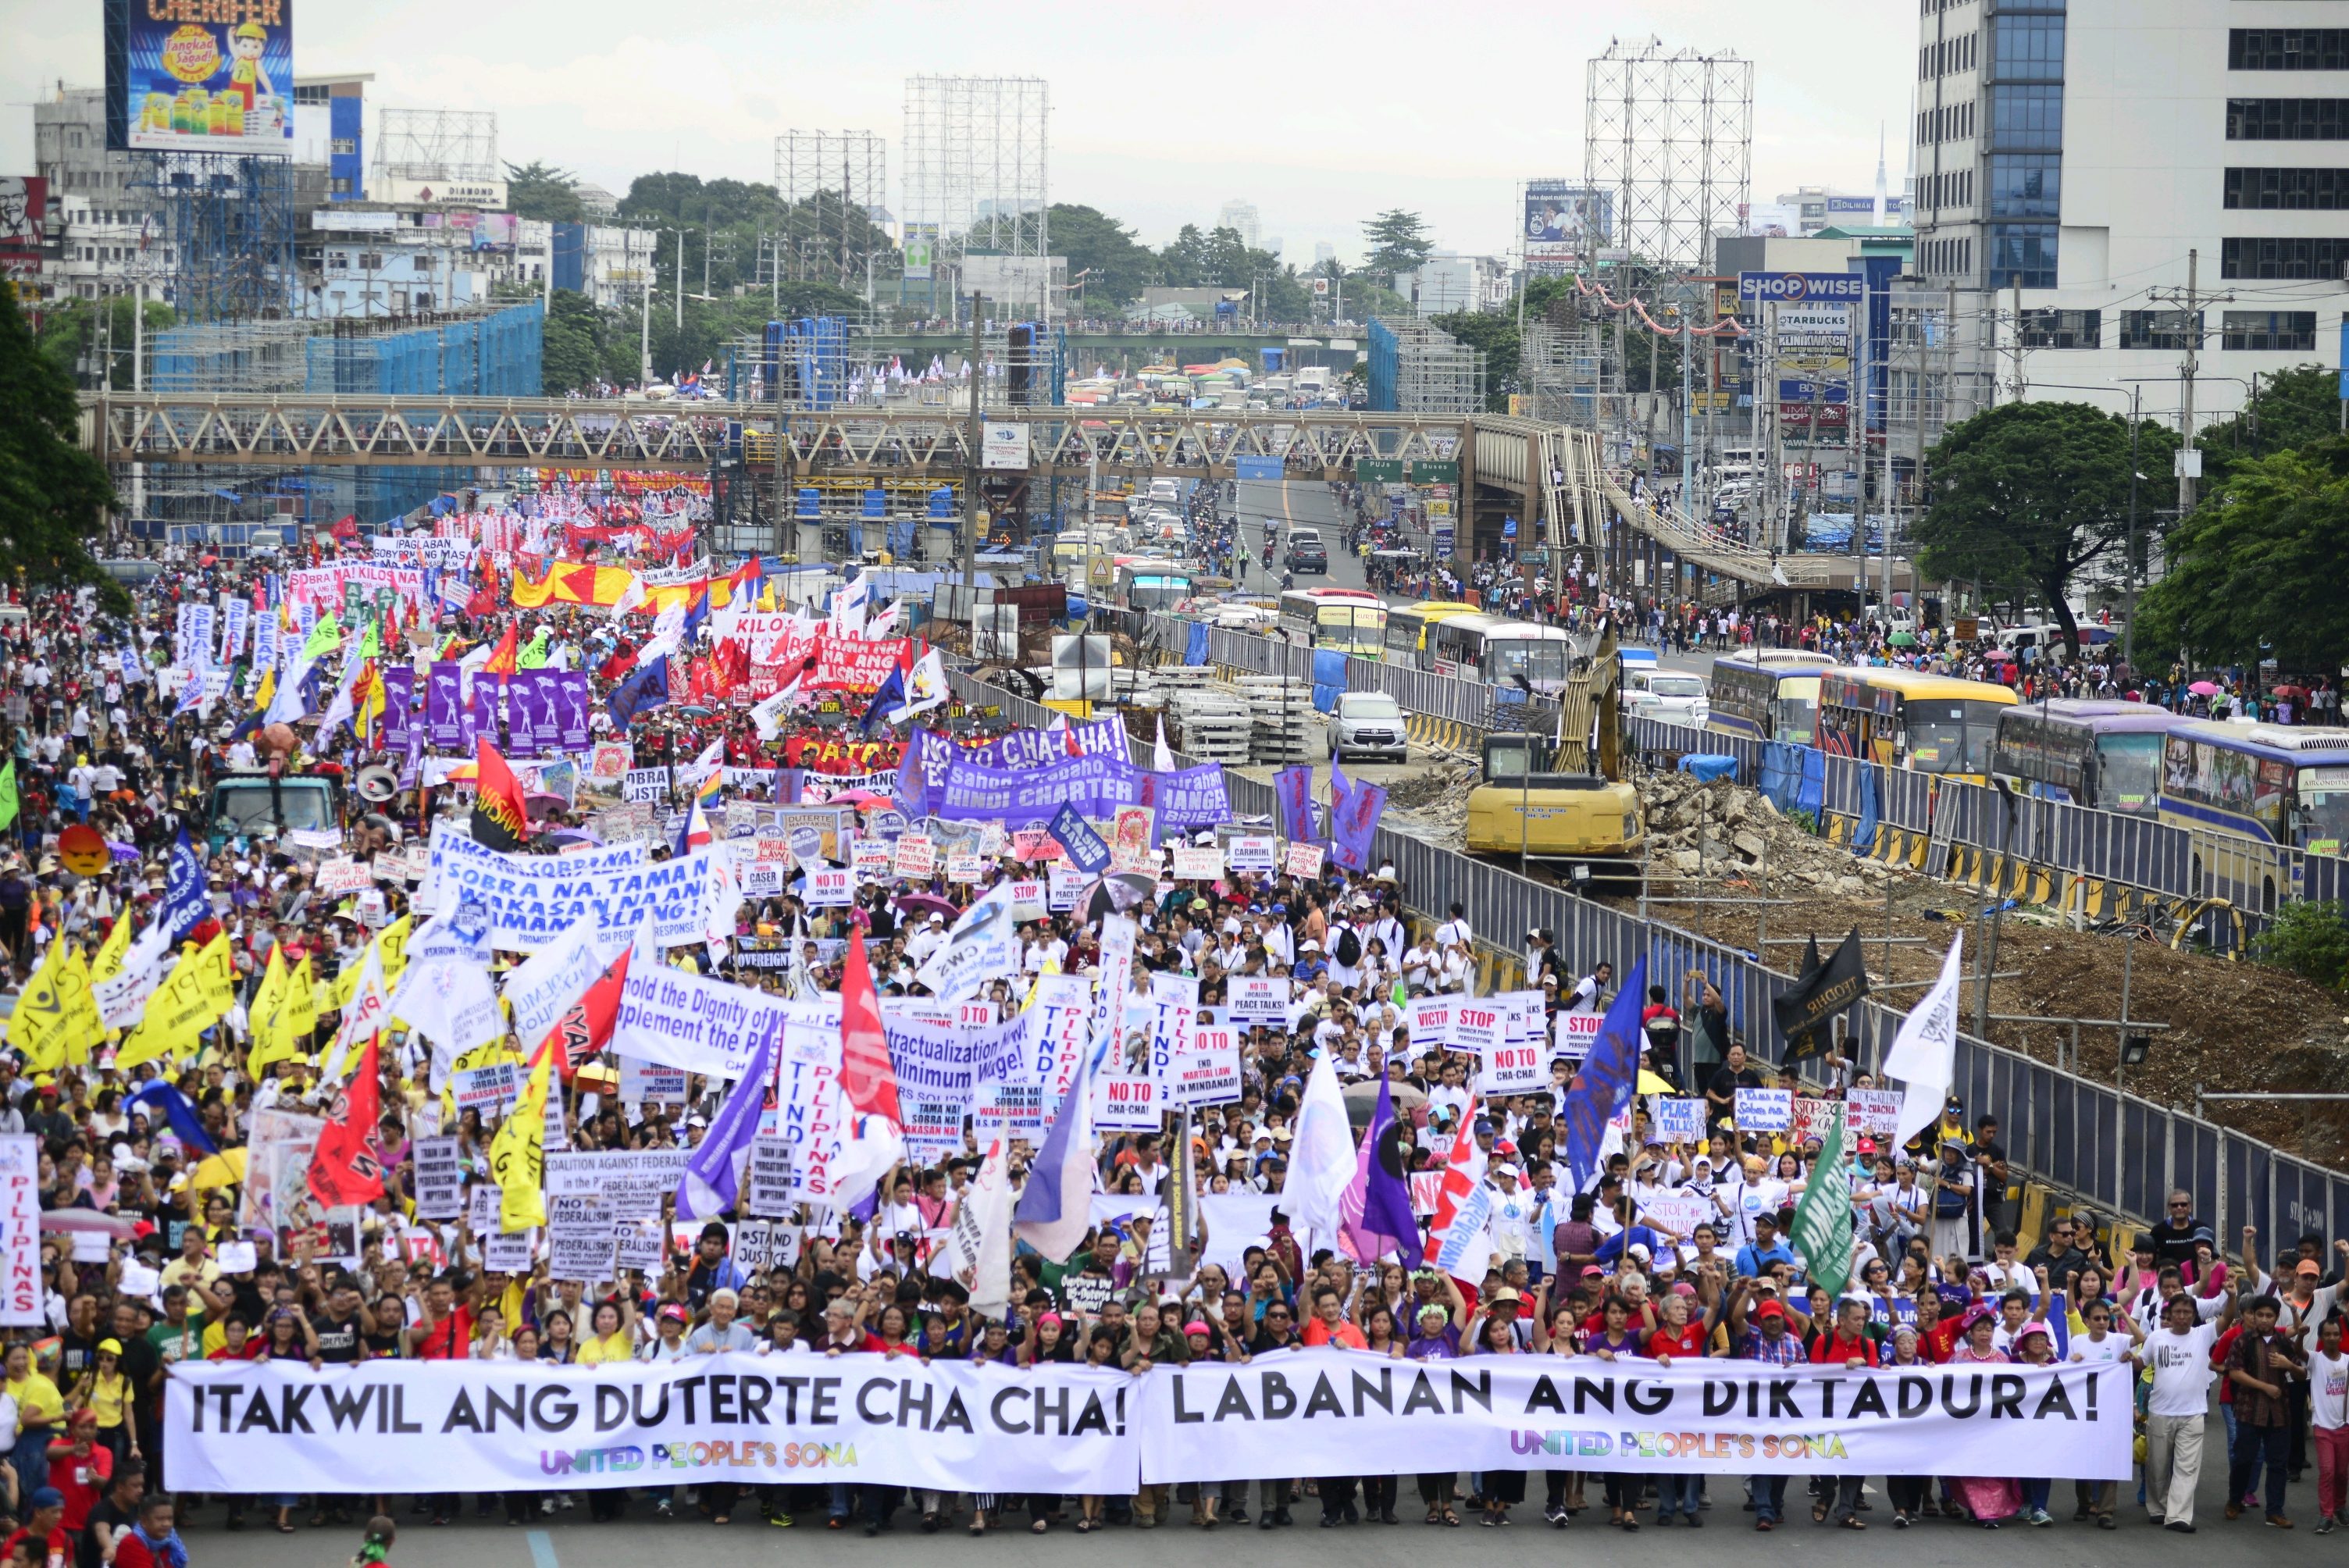 UNITY MARCH. Thousands of anti-Duterte protesters march along Commonwealth Avenue in Quezon City on July 23, 2018, for the 'United People's SONA'. Photo by Maria Tan/Rappler  